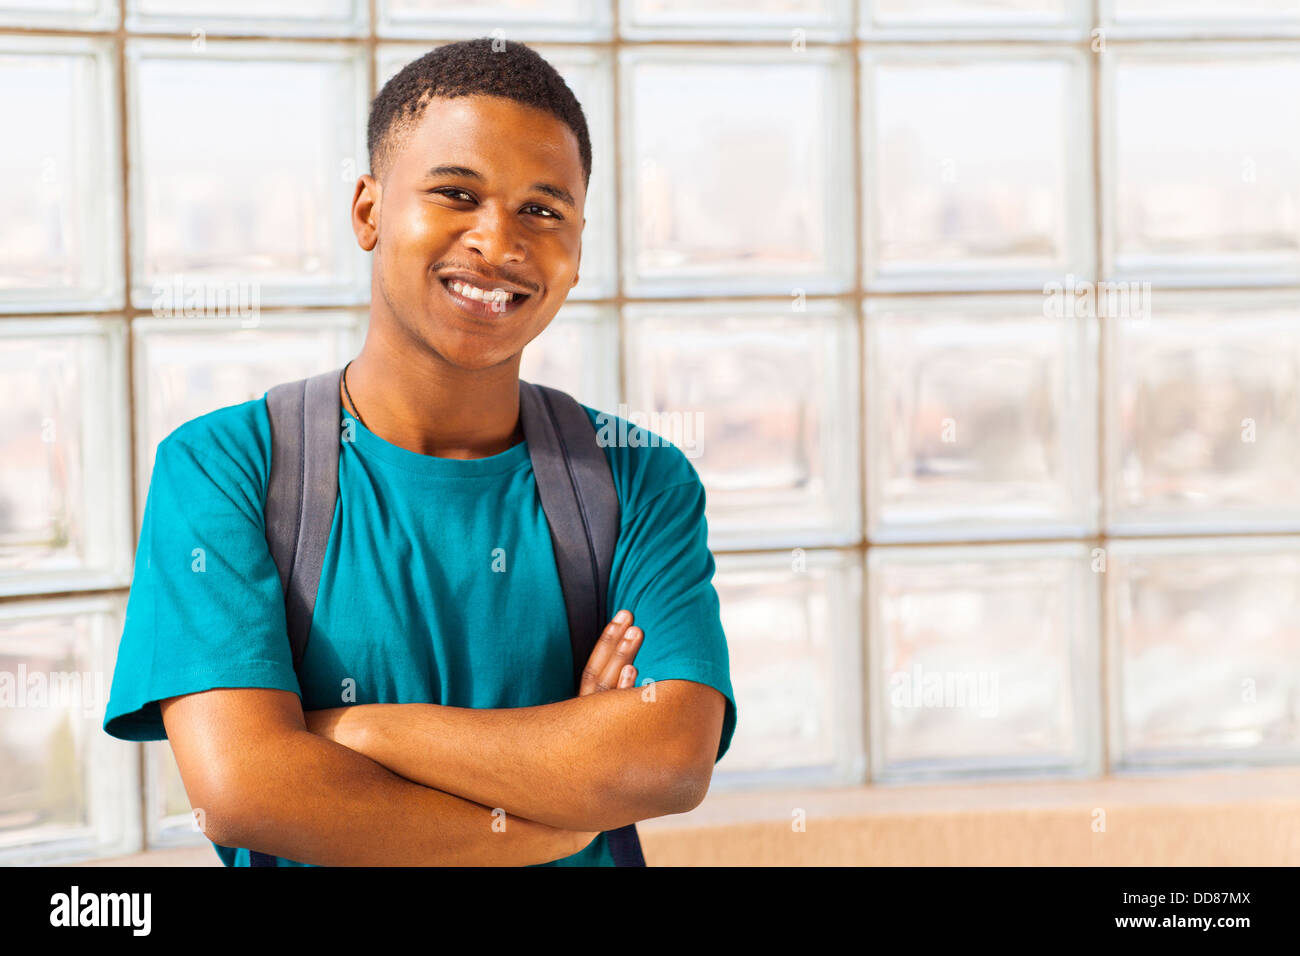 handsome African college student with arms crossed Stock Photo